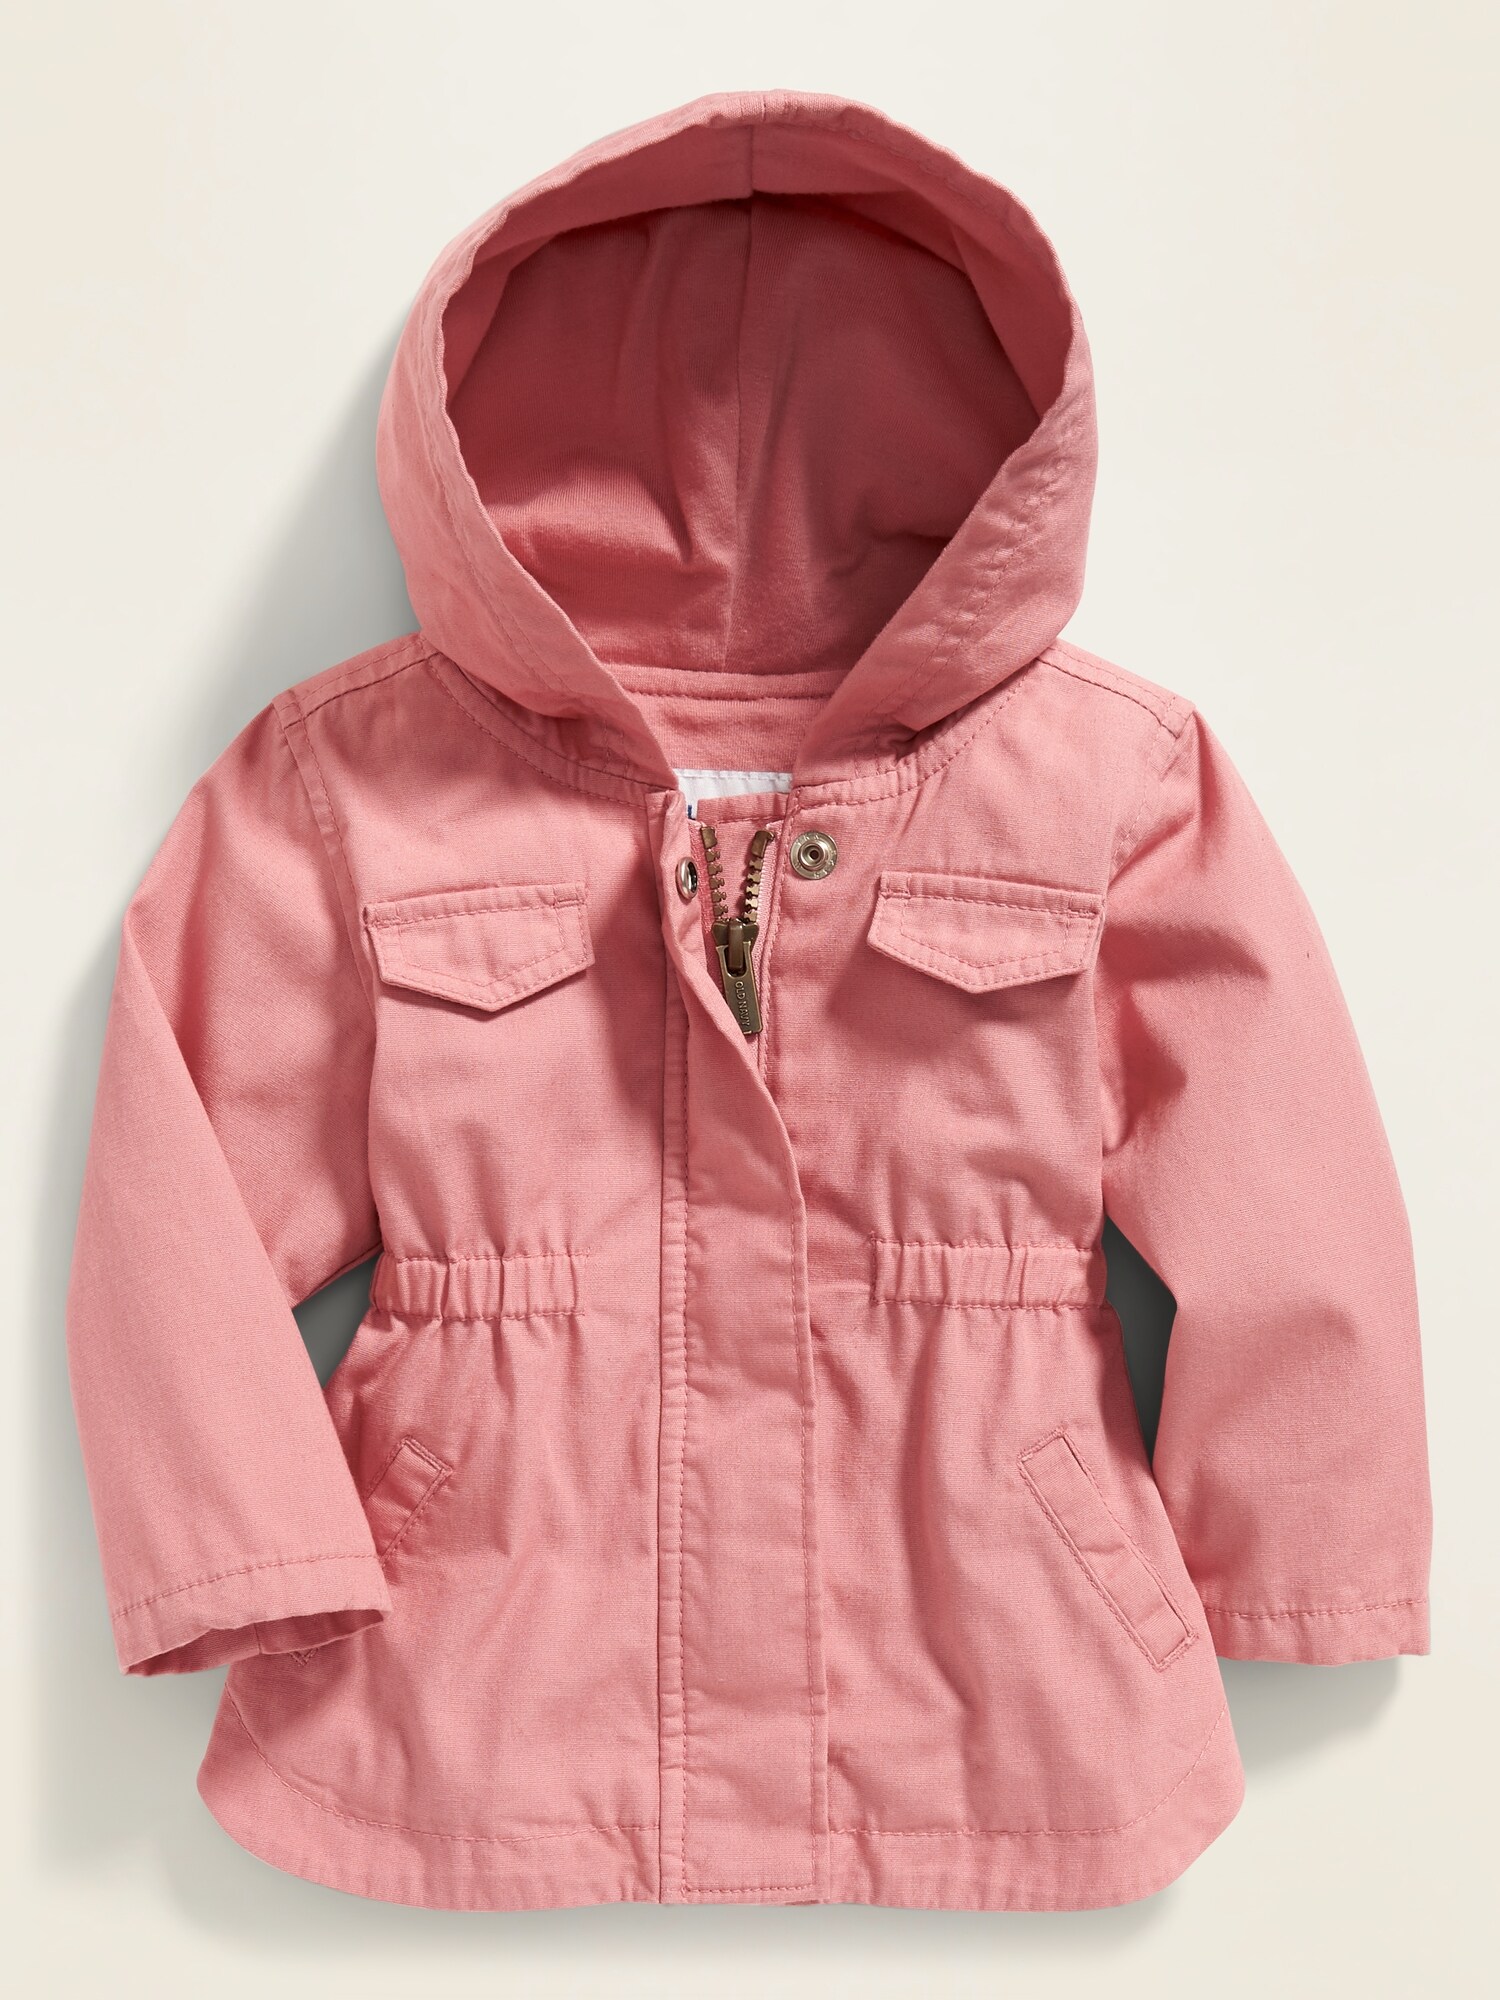 old navy baby outerwear